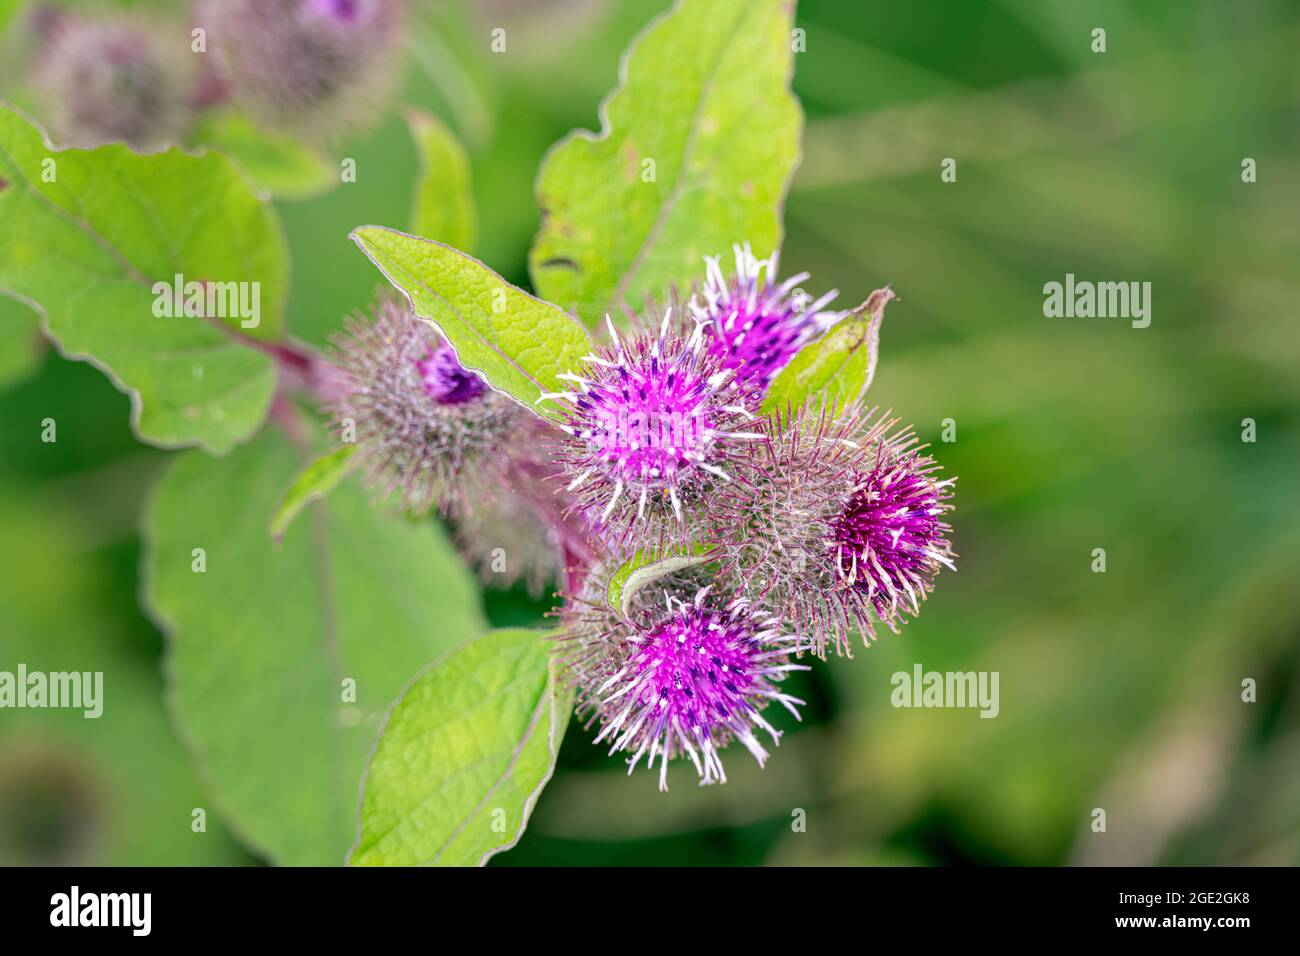 Common burdock, or Arctium minus, on a summer afternoon, close-up Stock Photo